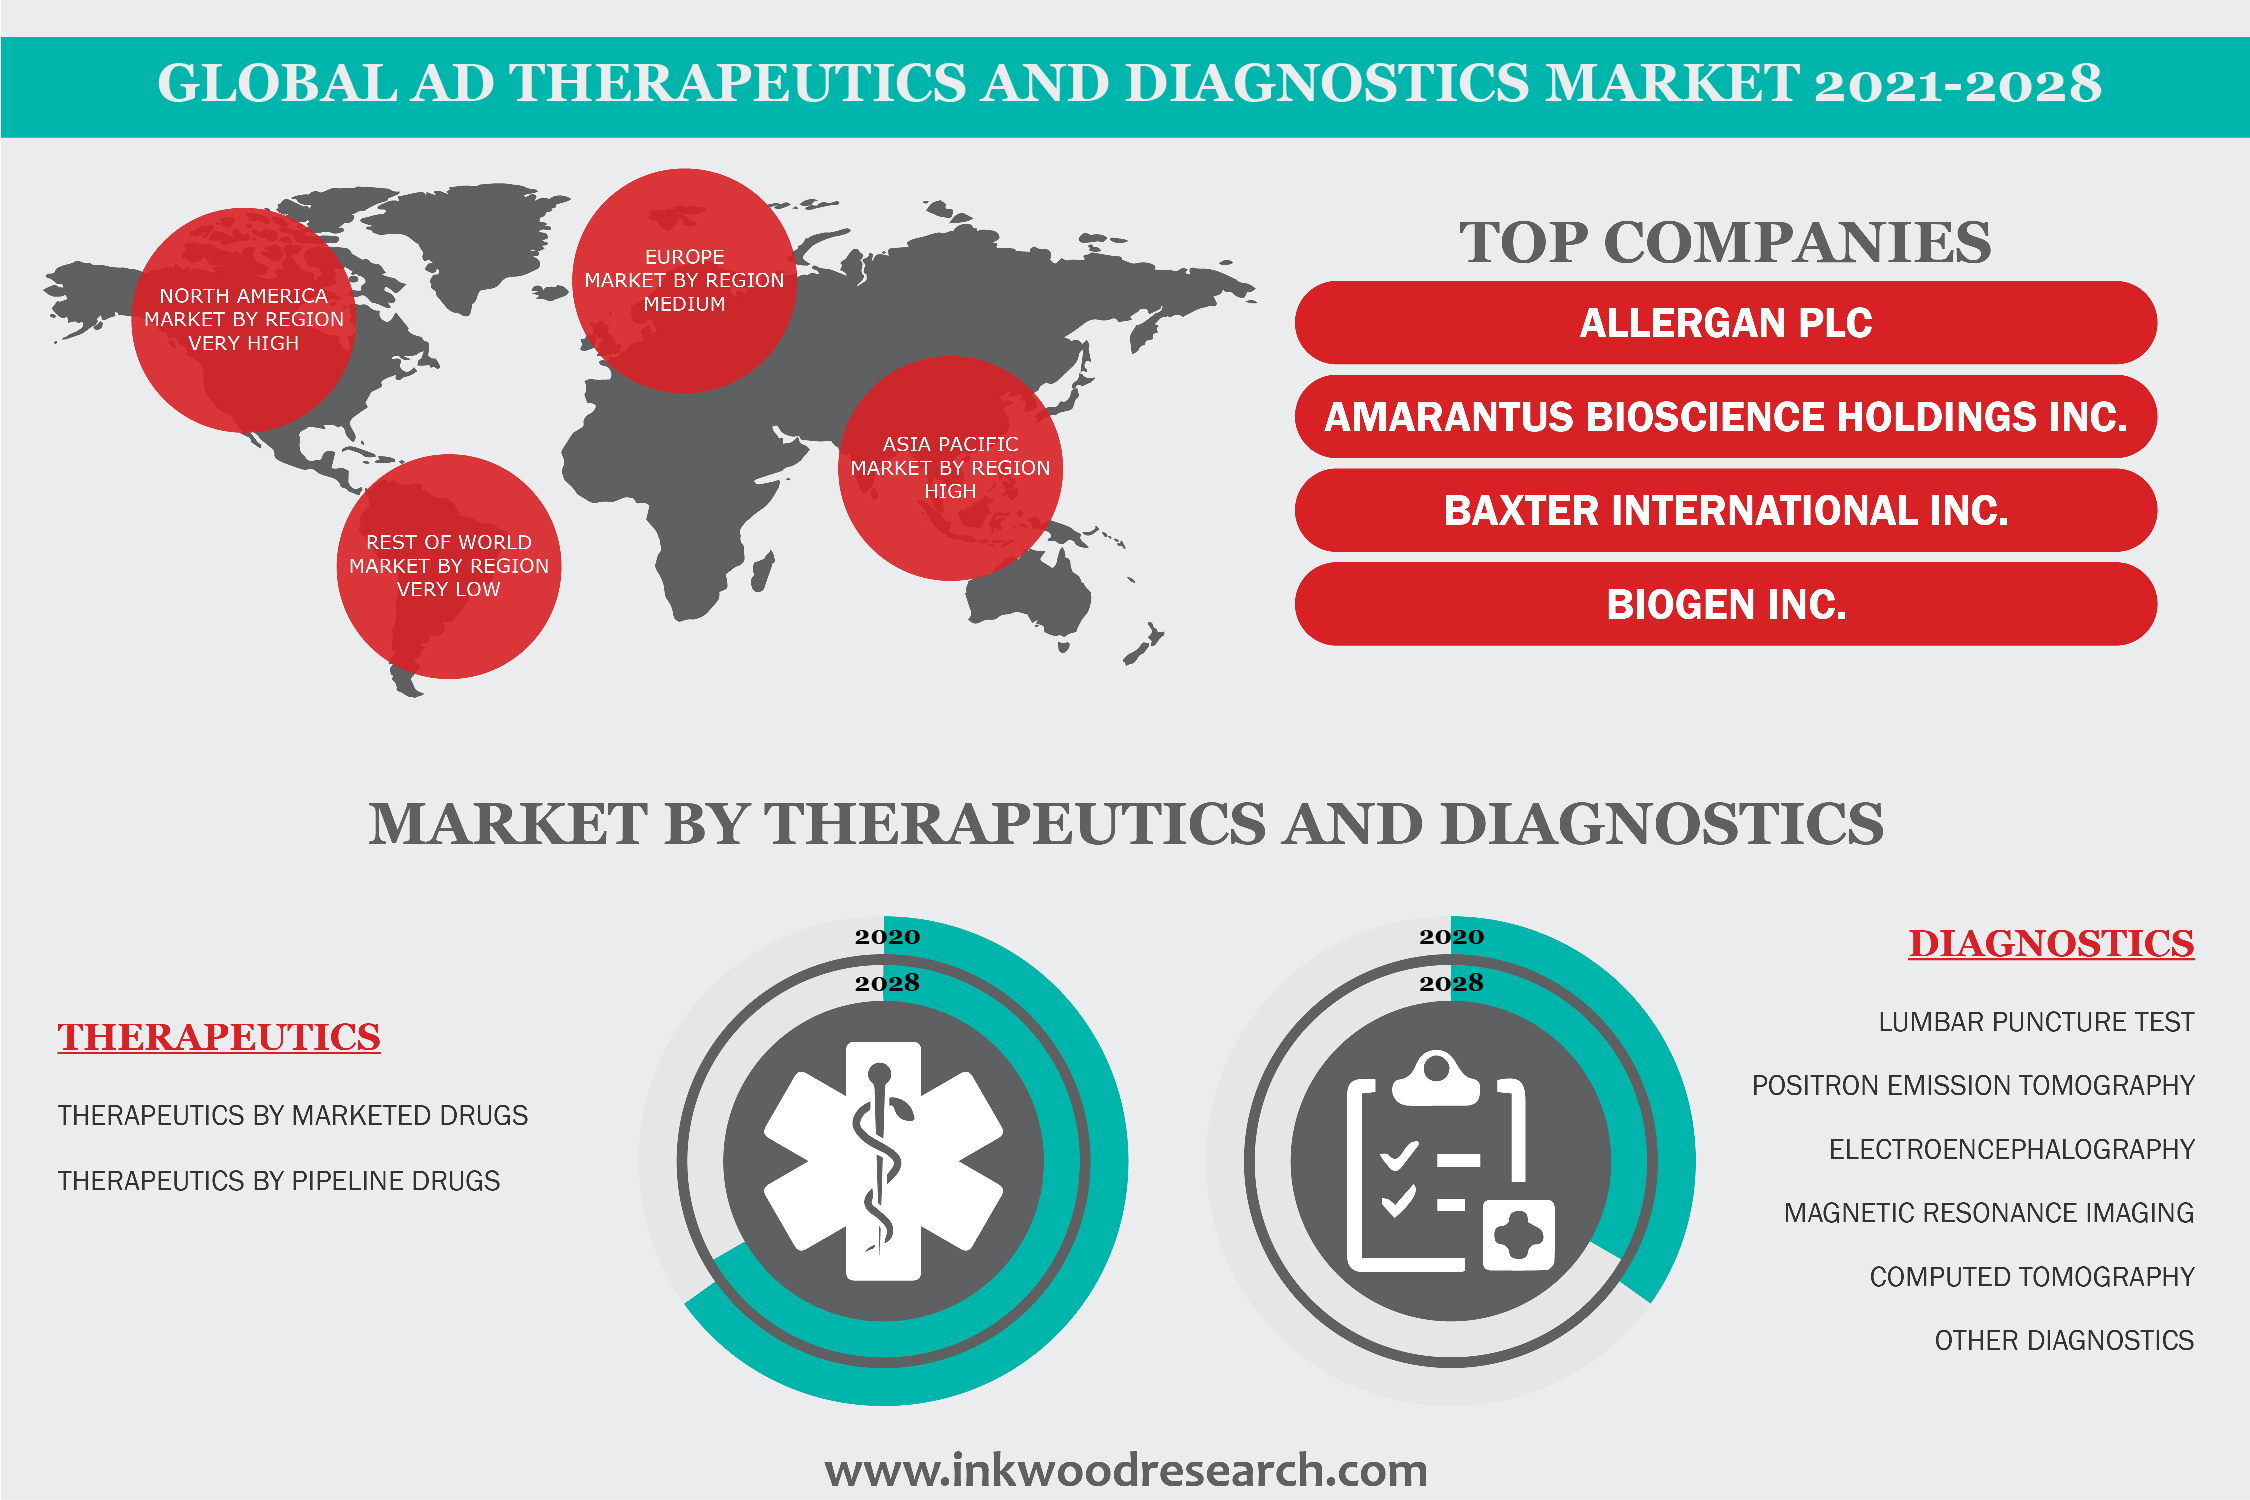 Emerging Technologies to impel Growth in the Global Alzheimer’s Disease Therapeutics and Diagnostics Market 